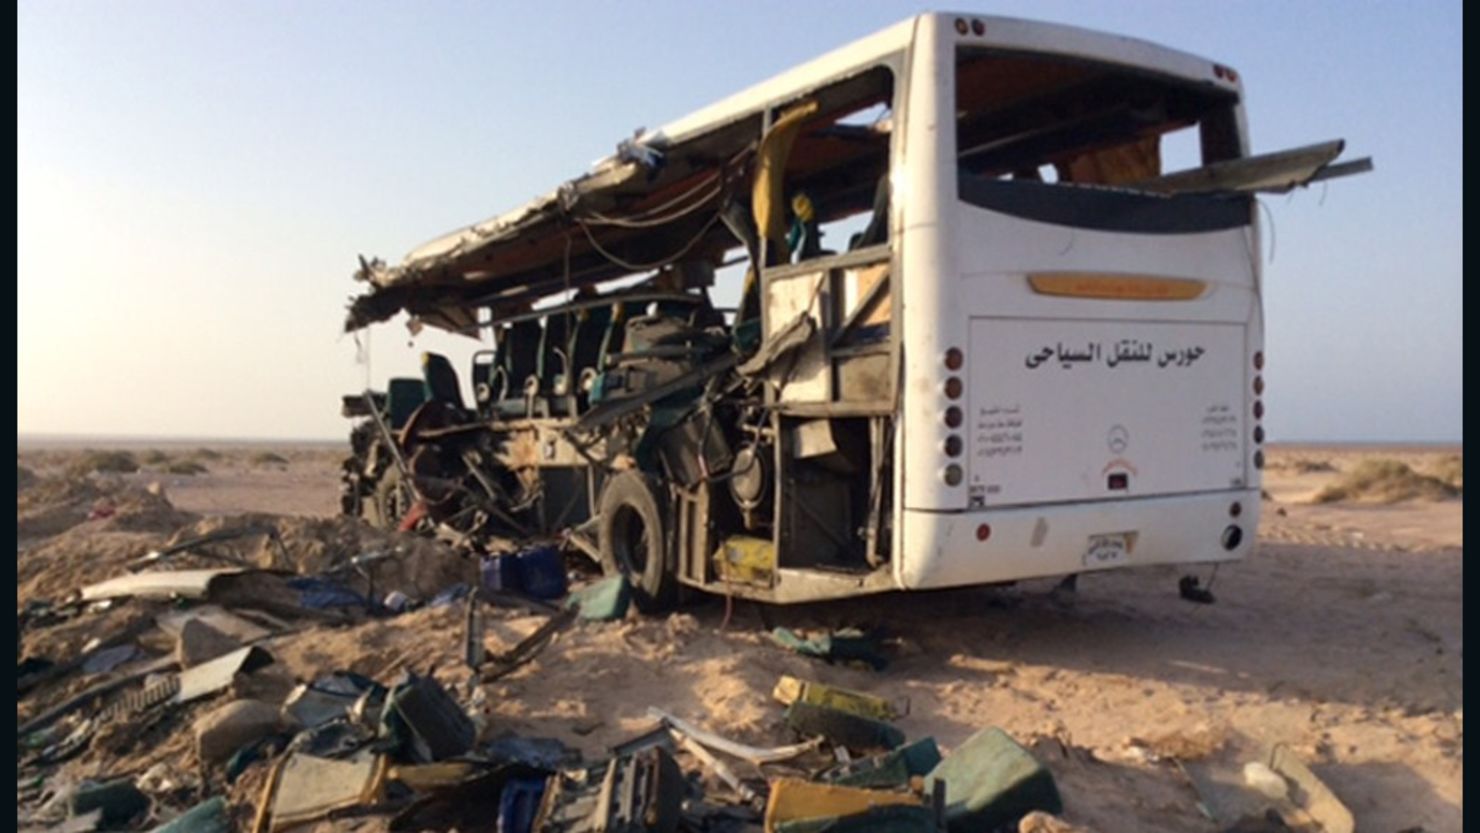 The wreckage of a bus after two tourist buses collided in northeastern Egypt, on August 22, 2014.